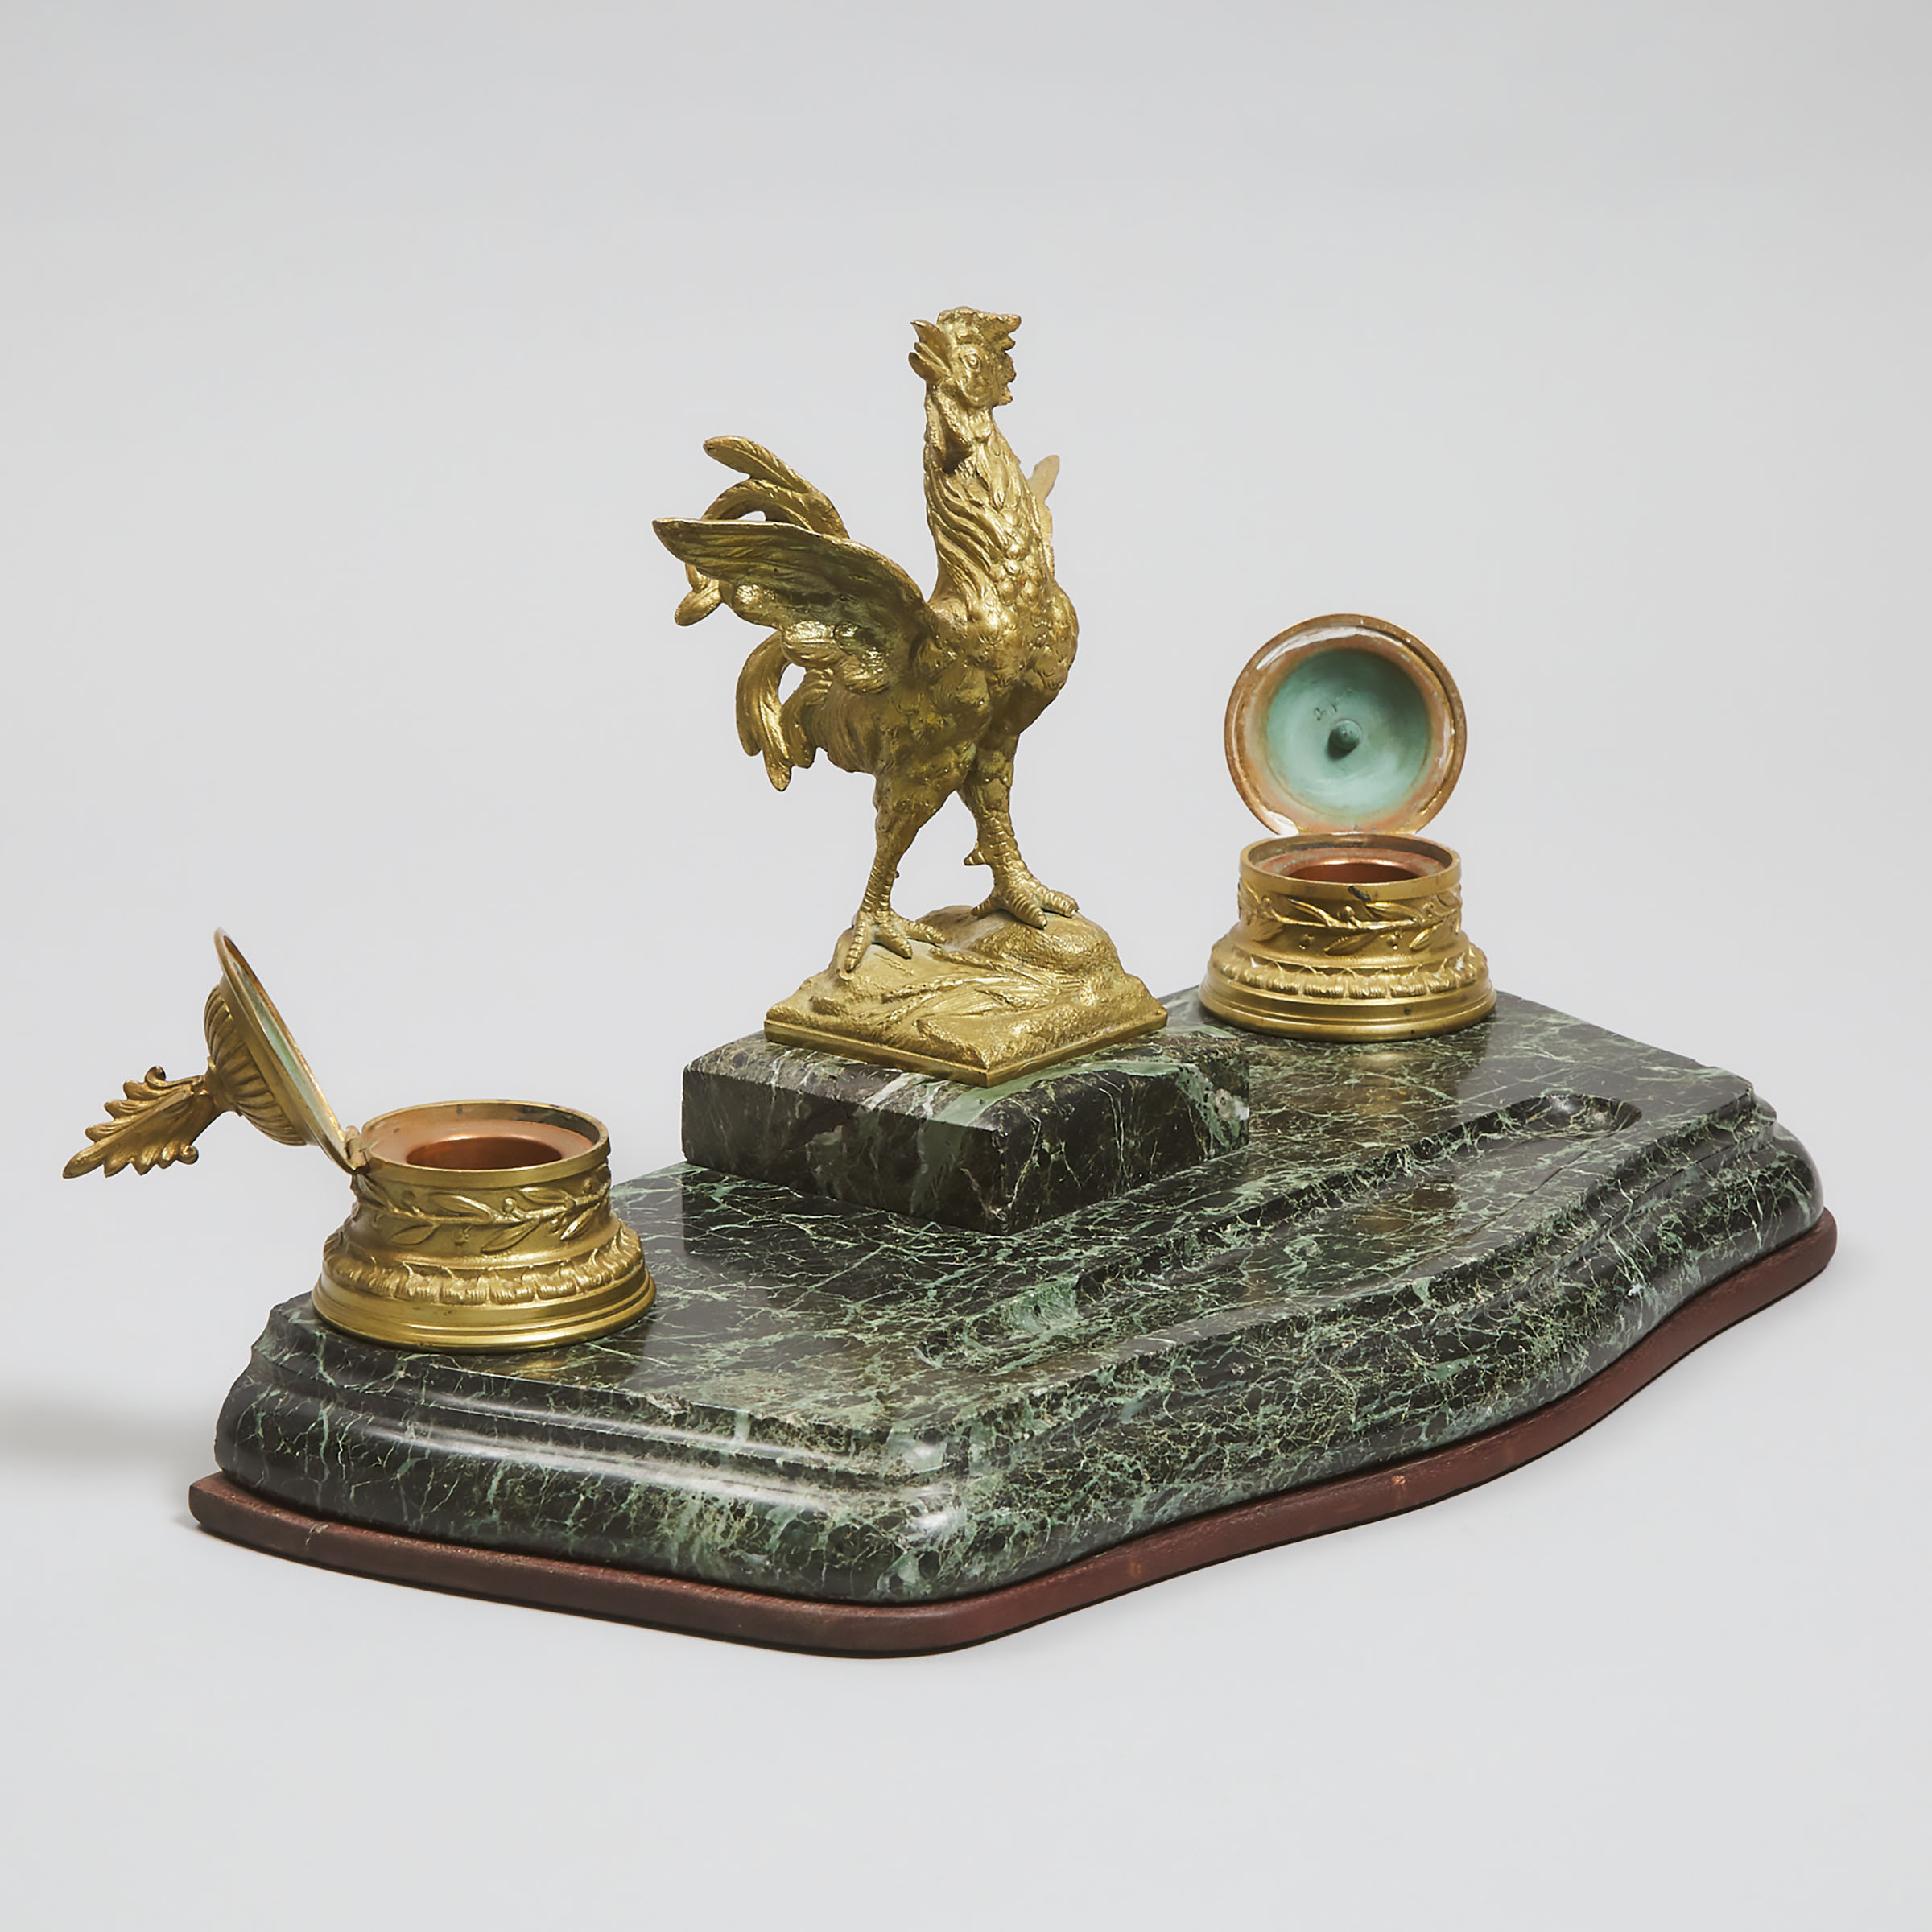 Large French Belle Époque Verde Antico Marble and Gilt Bronze Desk Stand, late19th/early 20th century